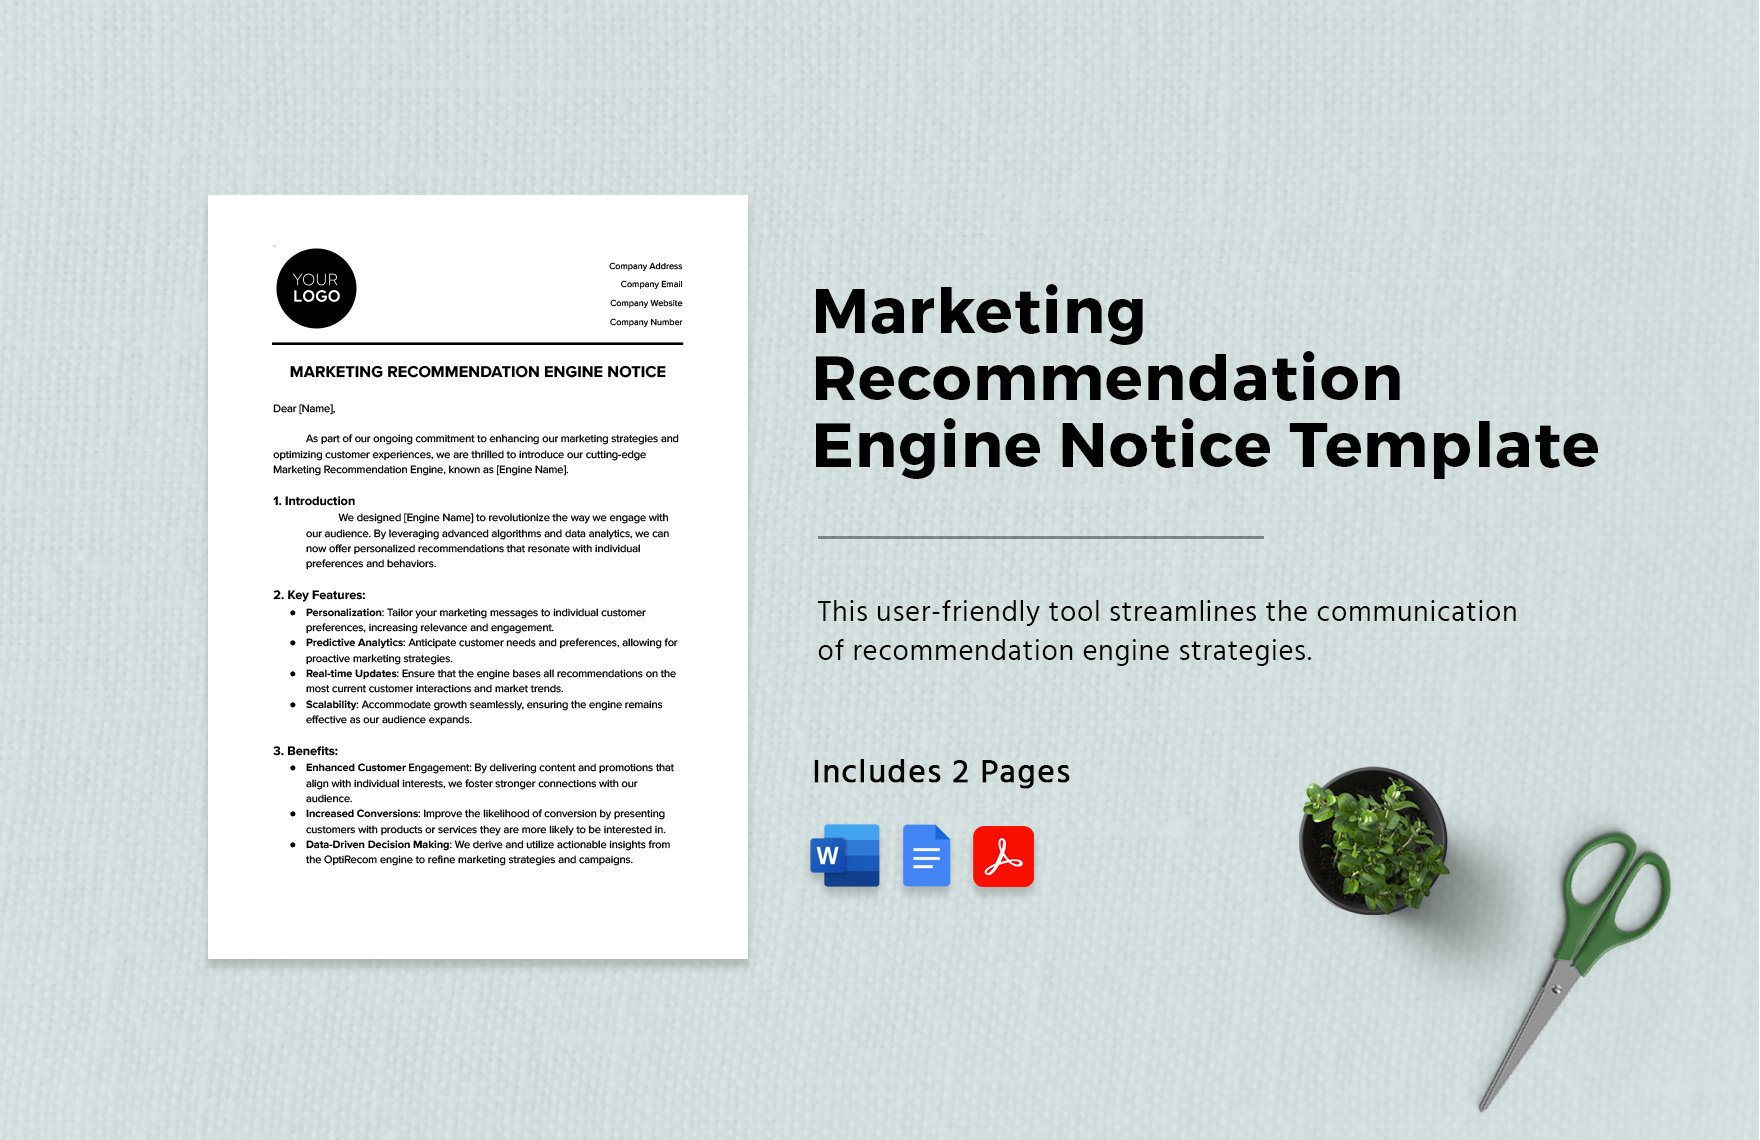 Marketing Recommendation Engine Notice Template in Word, Google Docs, PDF